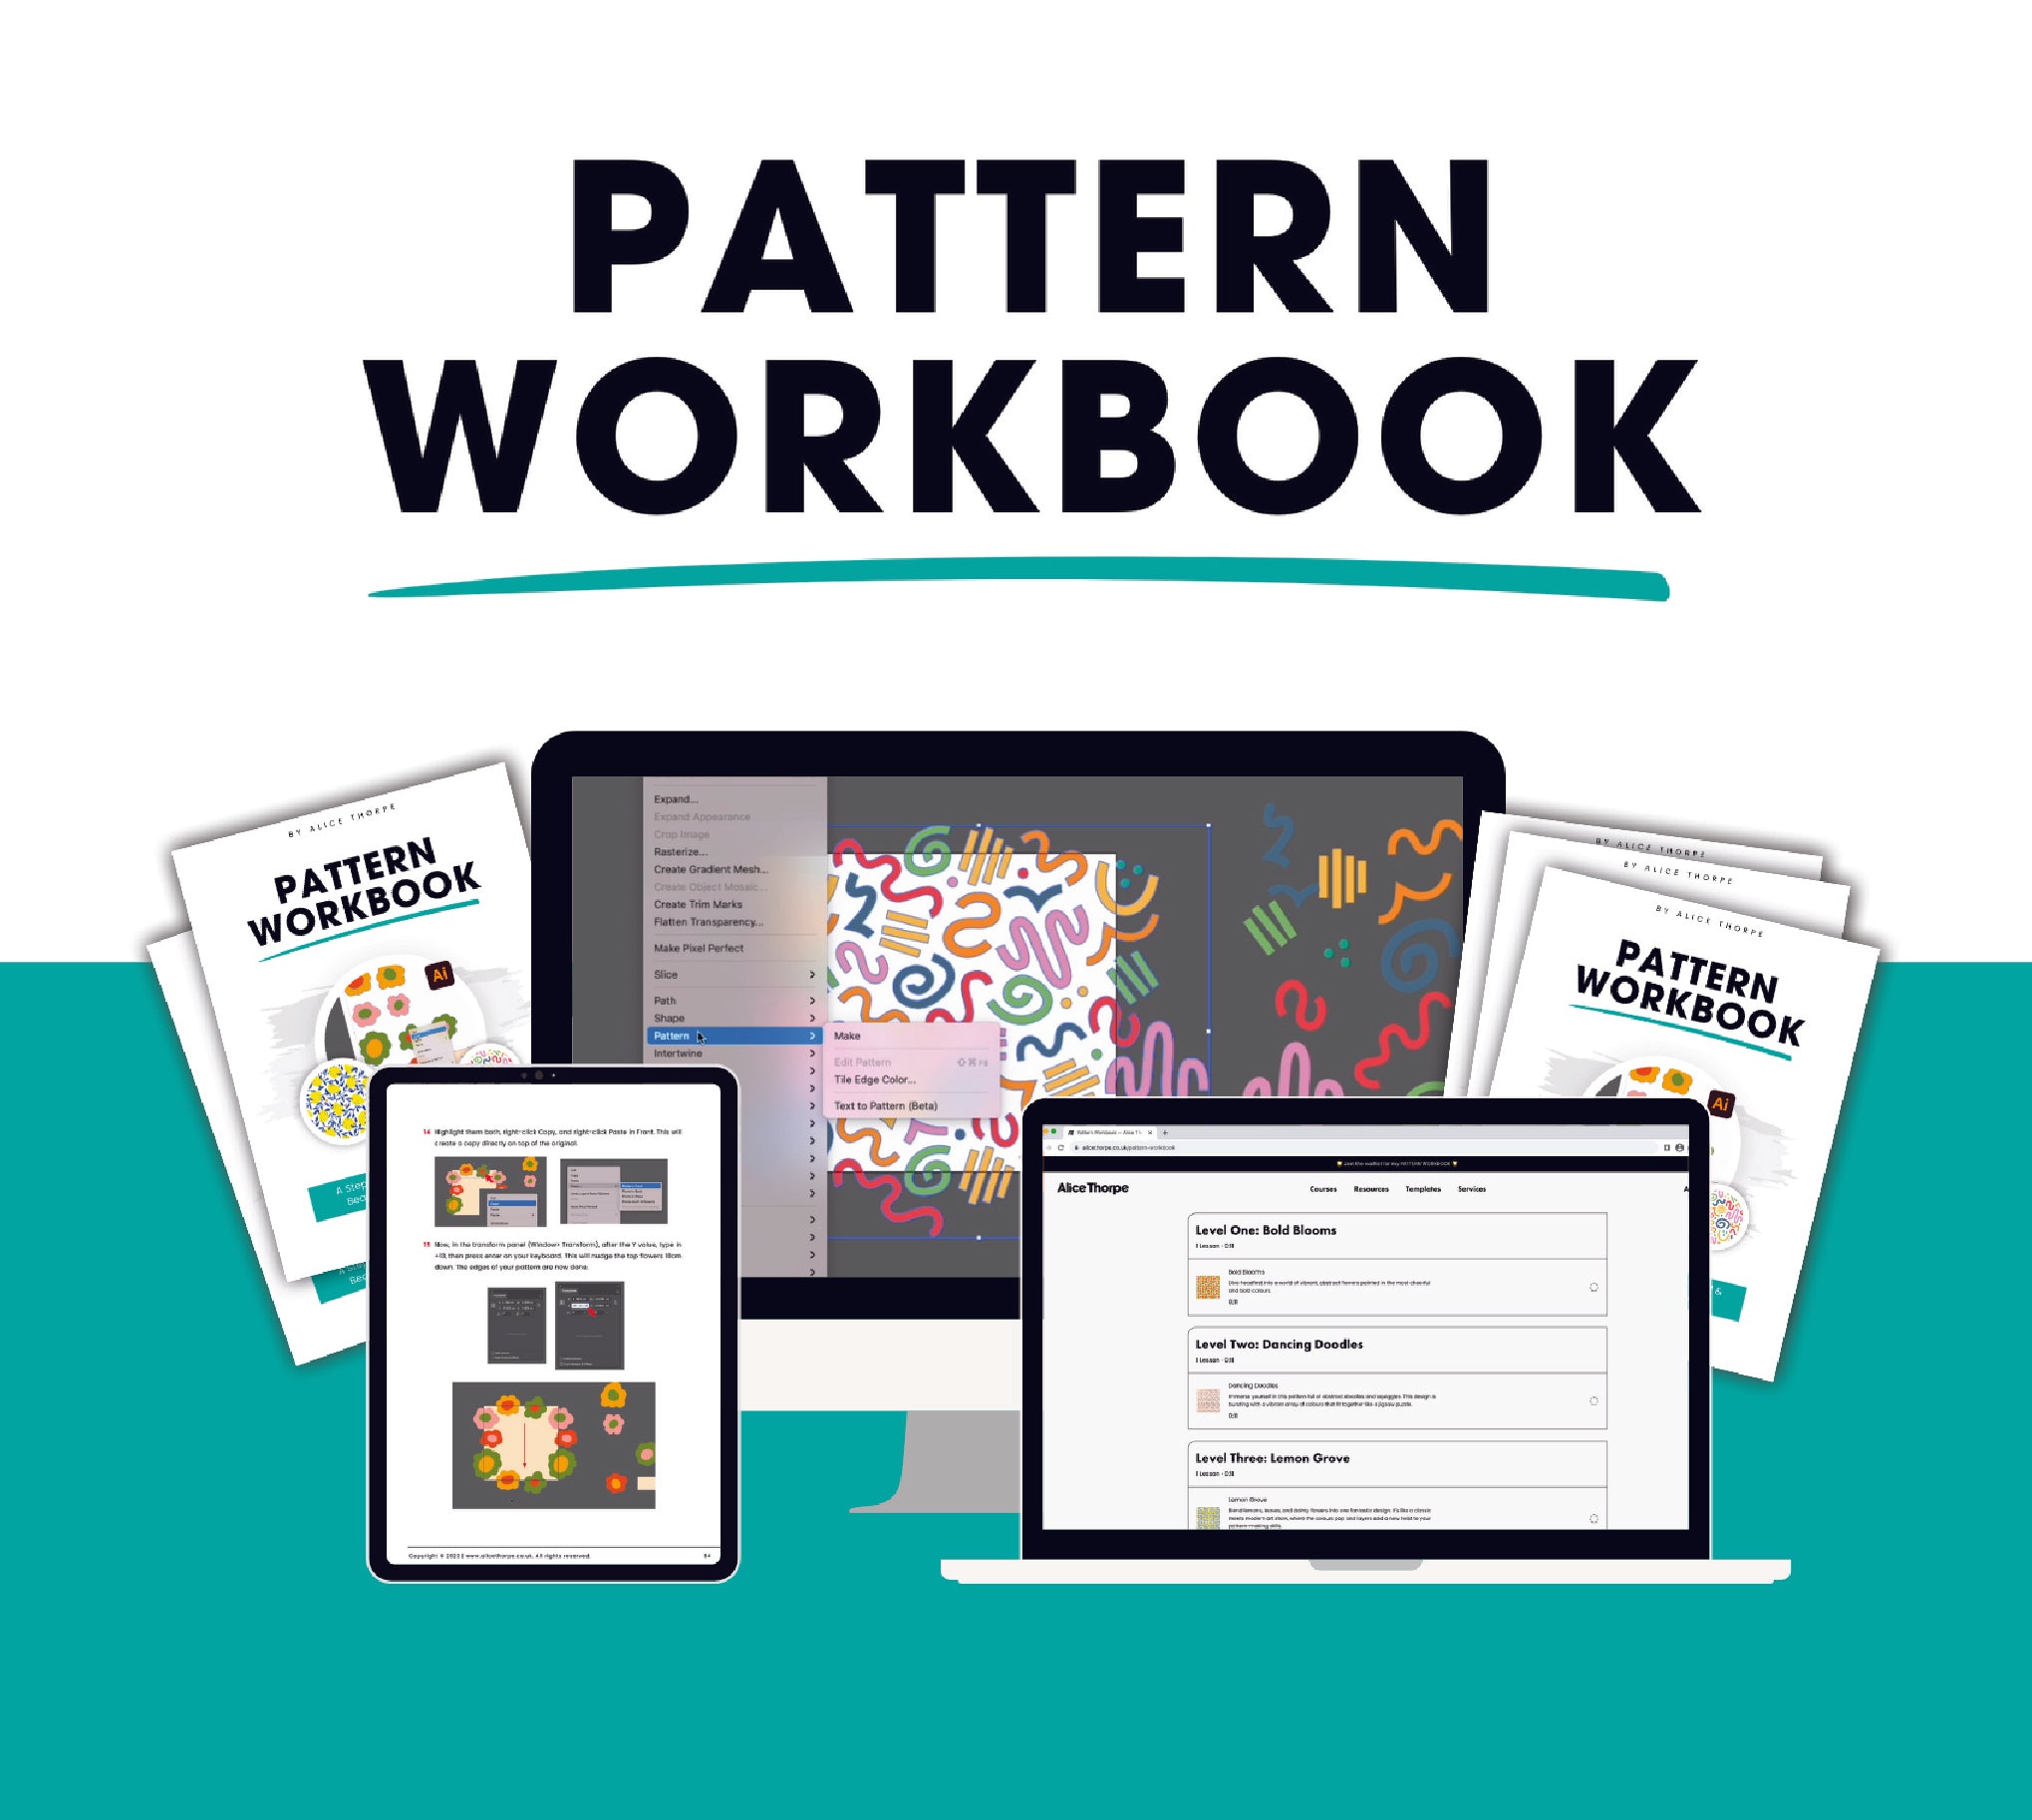 Pattern Workbook Online Course by Alice Thorpe